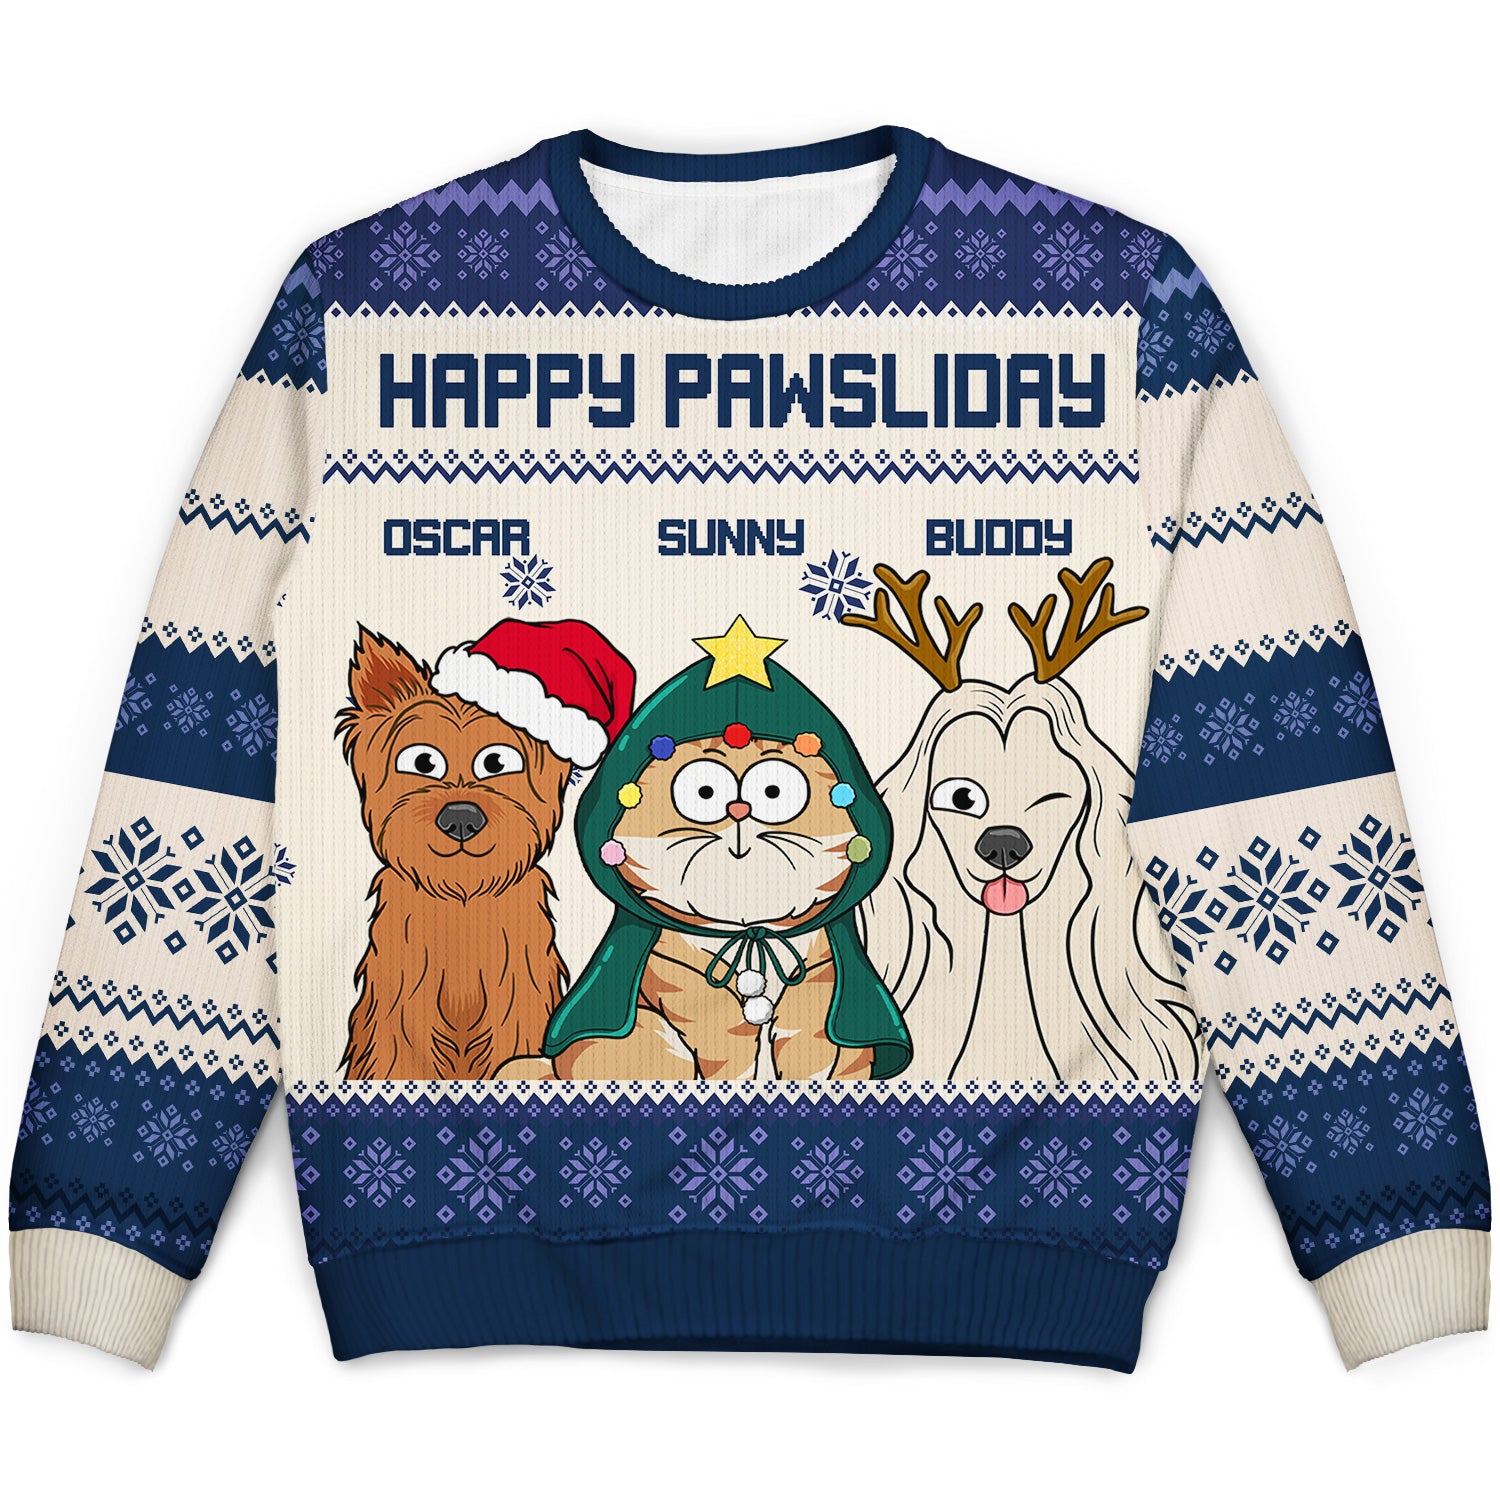 Happy Pawsliday - Funny, Christmas Gift For Dog Lovers, Cat Lovers - Personalized Unisex Ugly Sweater